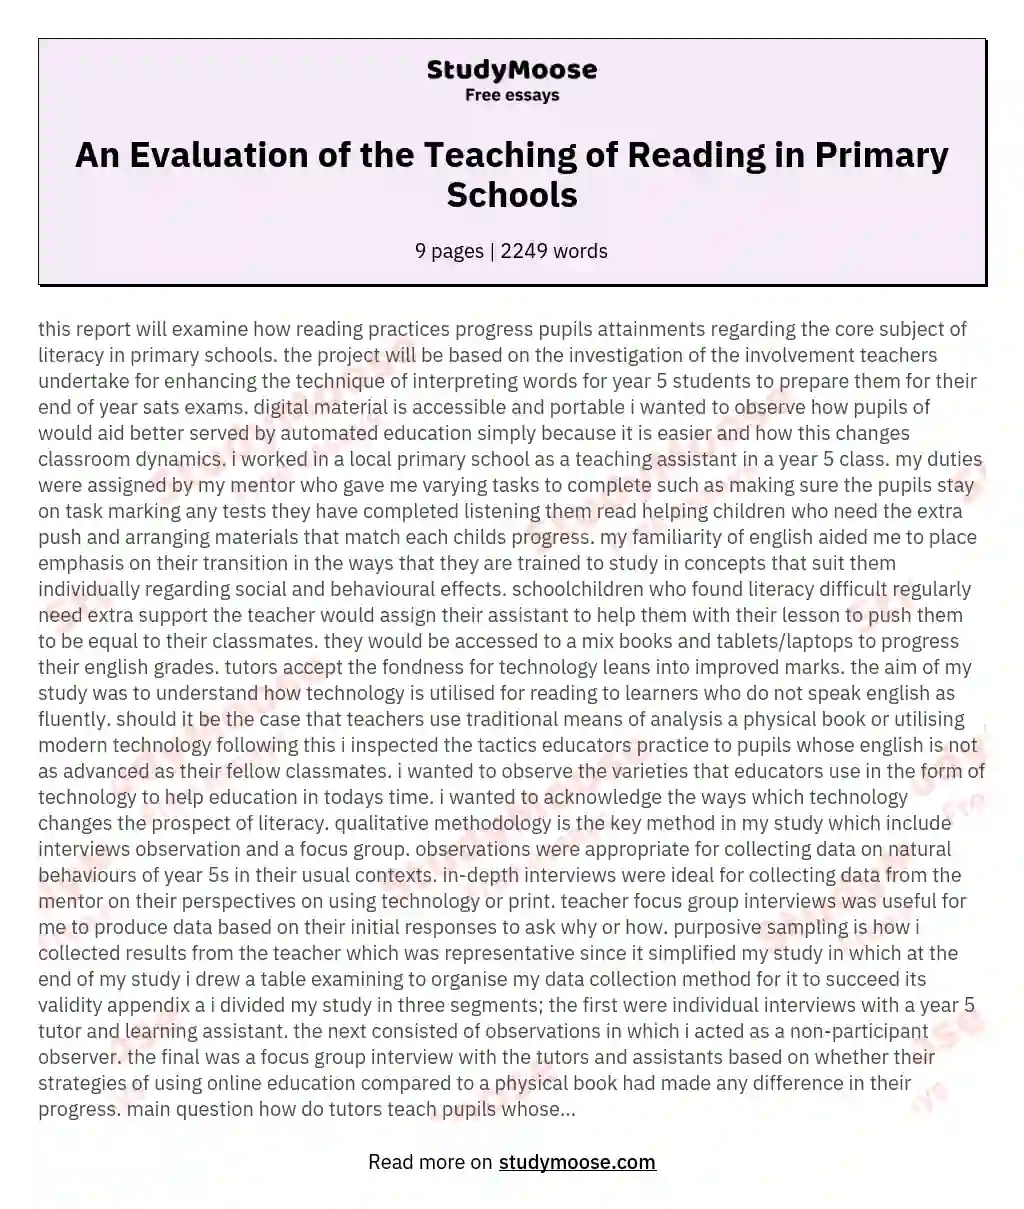 An Evaluation of the Teaching of Reading in Primary Schools essay